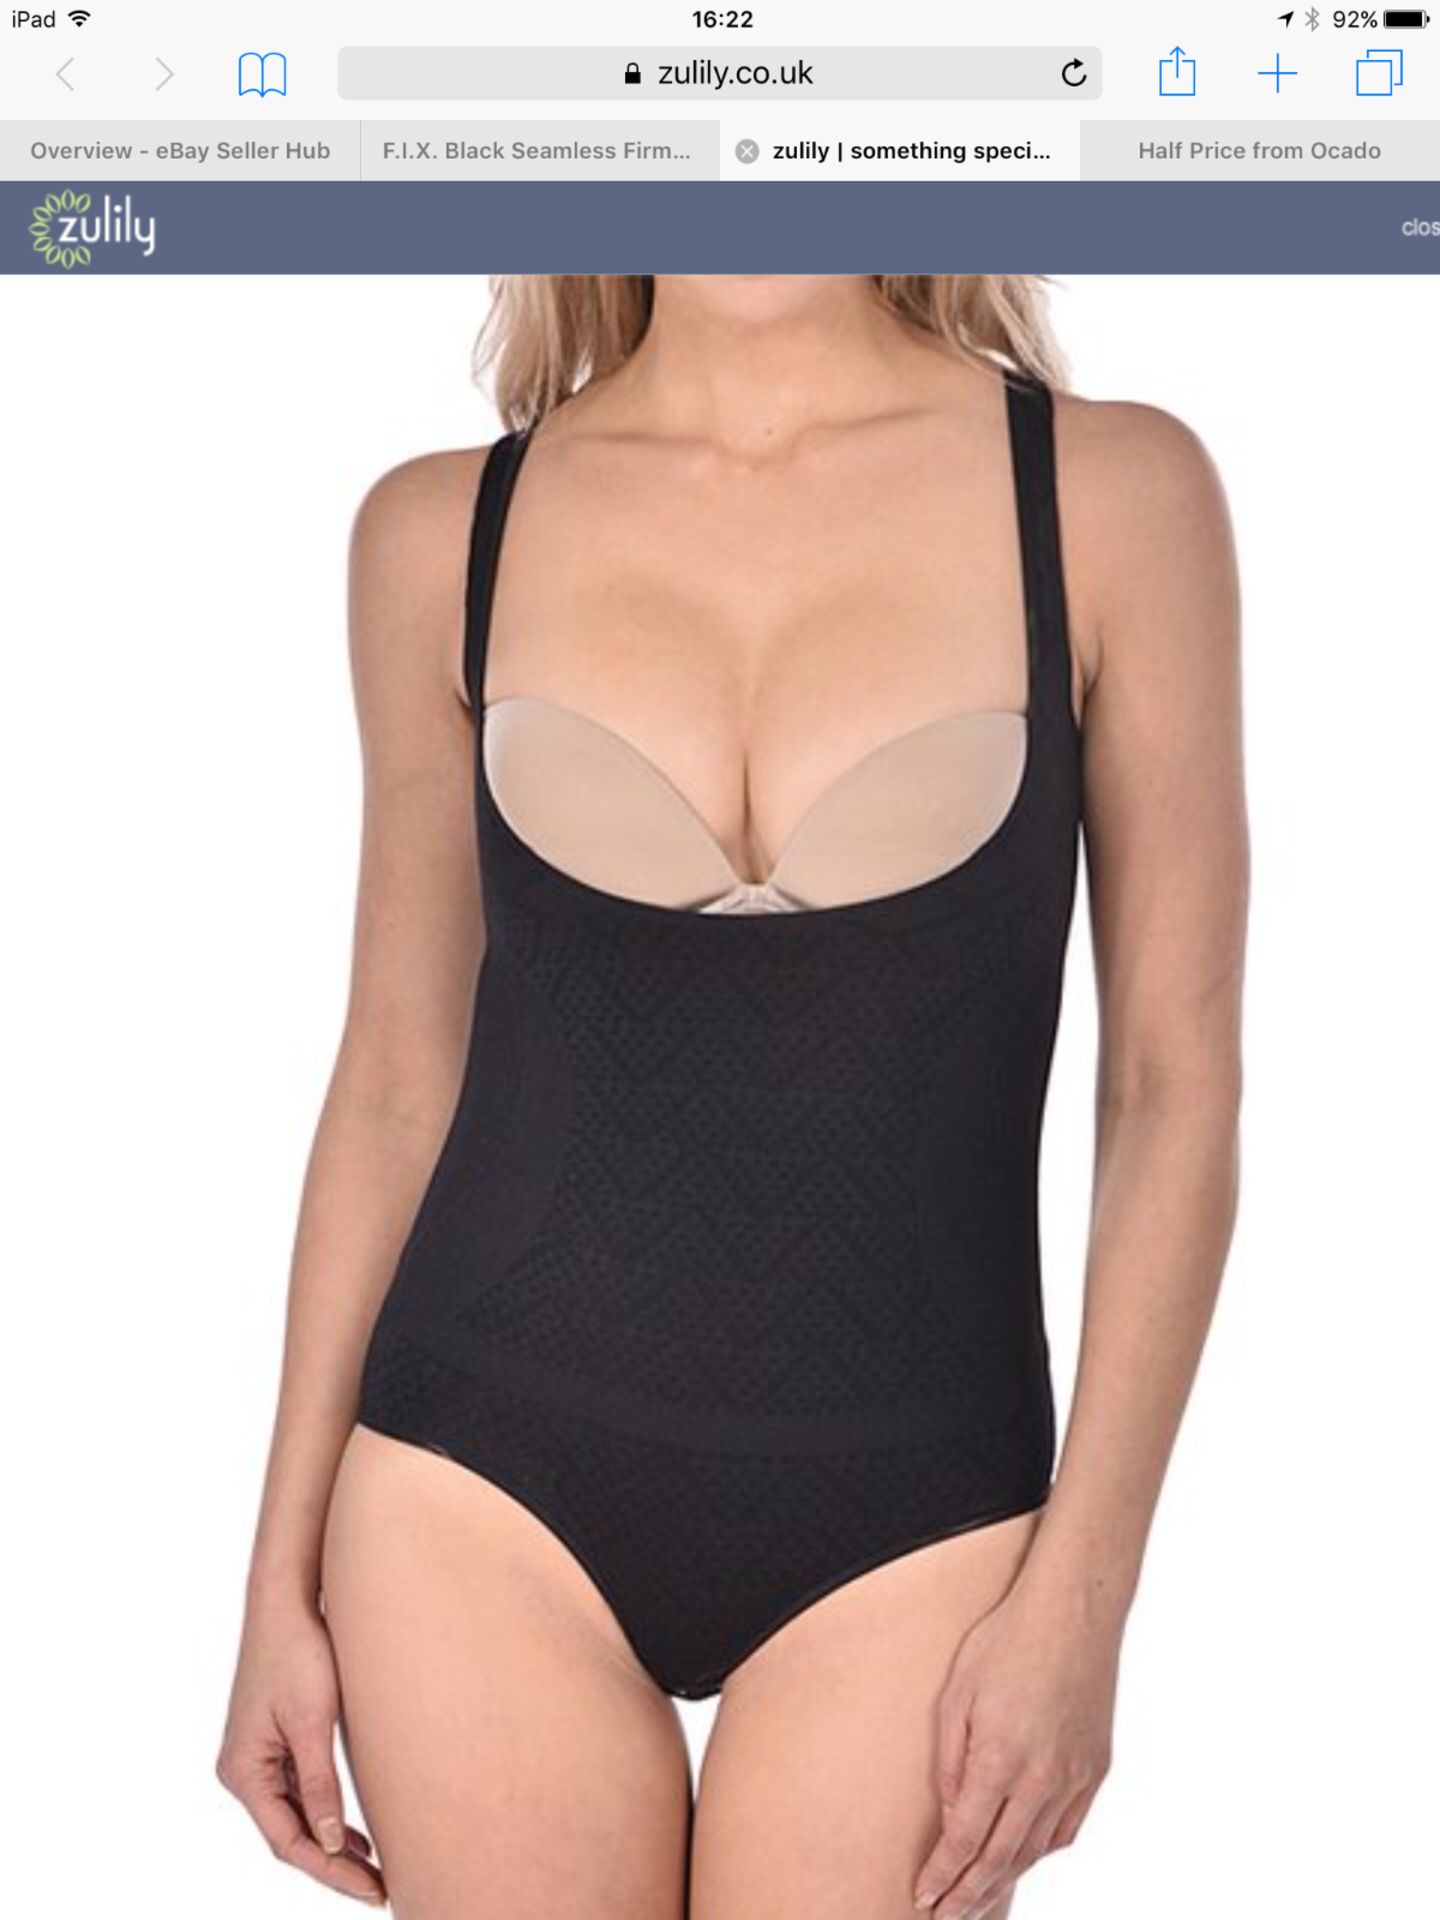 F.I.X. Black Seamless Firm Compression Underbust Bodysuit, Size S/M (New With Tags) [Ref: -T-]